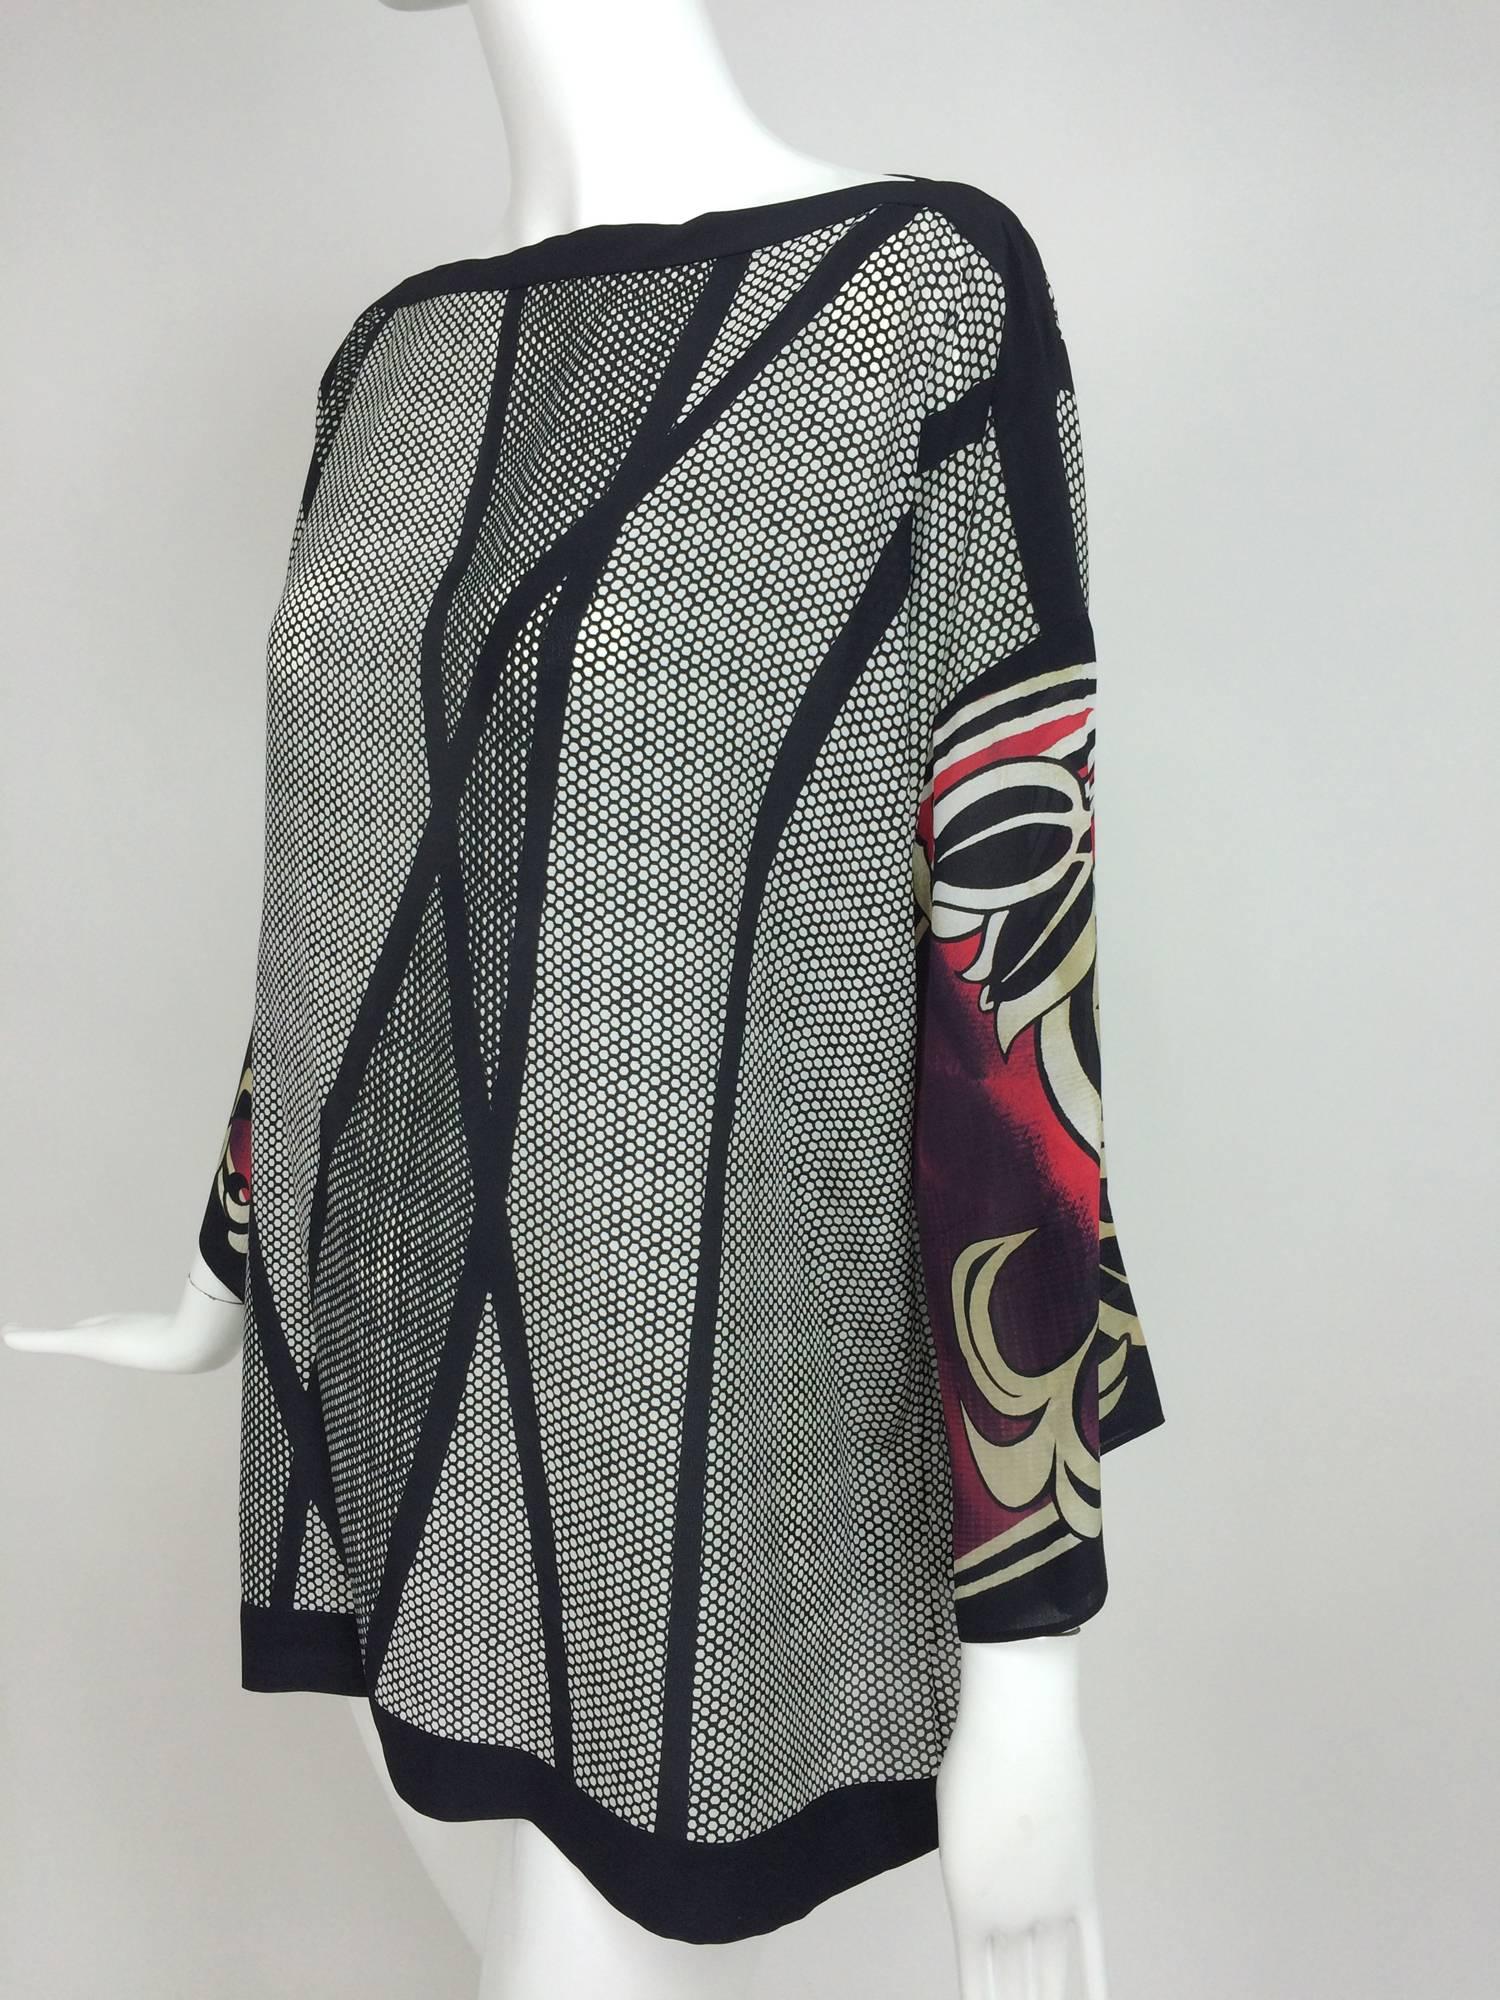 Escada printed silk tunic top 44...Pull on top has a bateau neckline, bracelet length sleeves and dropped shoulder seams...Looks unworn...

In excellent wearable condition... All our clothing is dry cleaned and inspected for condition and is ready